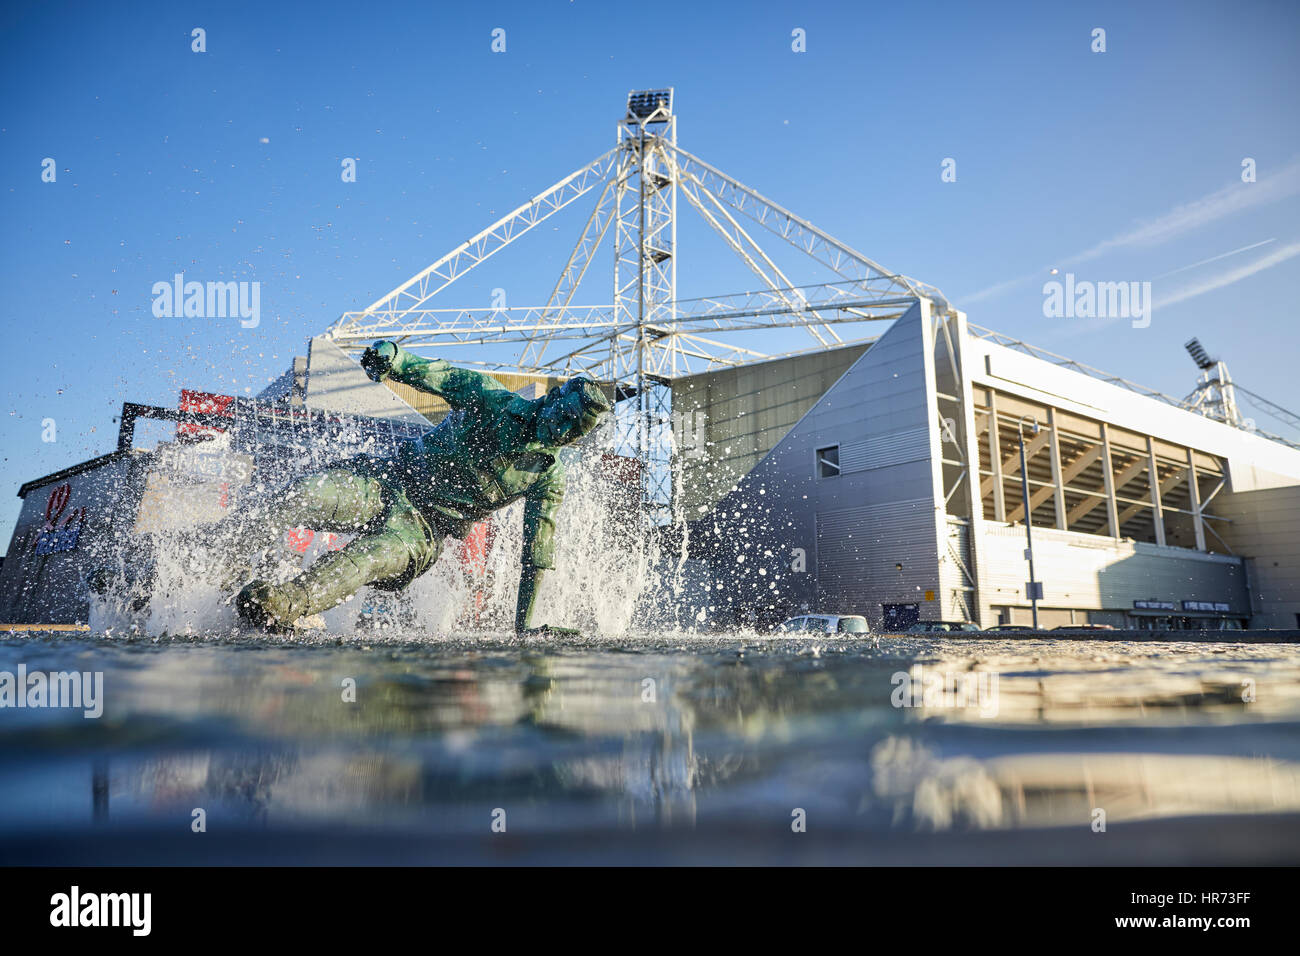 Preston FC  Deepdale stadium makes the backdrop for the landmark water feature Sir Tom Finney Statue  The Splash, by sculptor Peter Hodgkinson Stock Photo